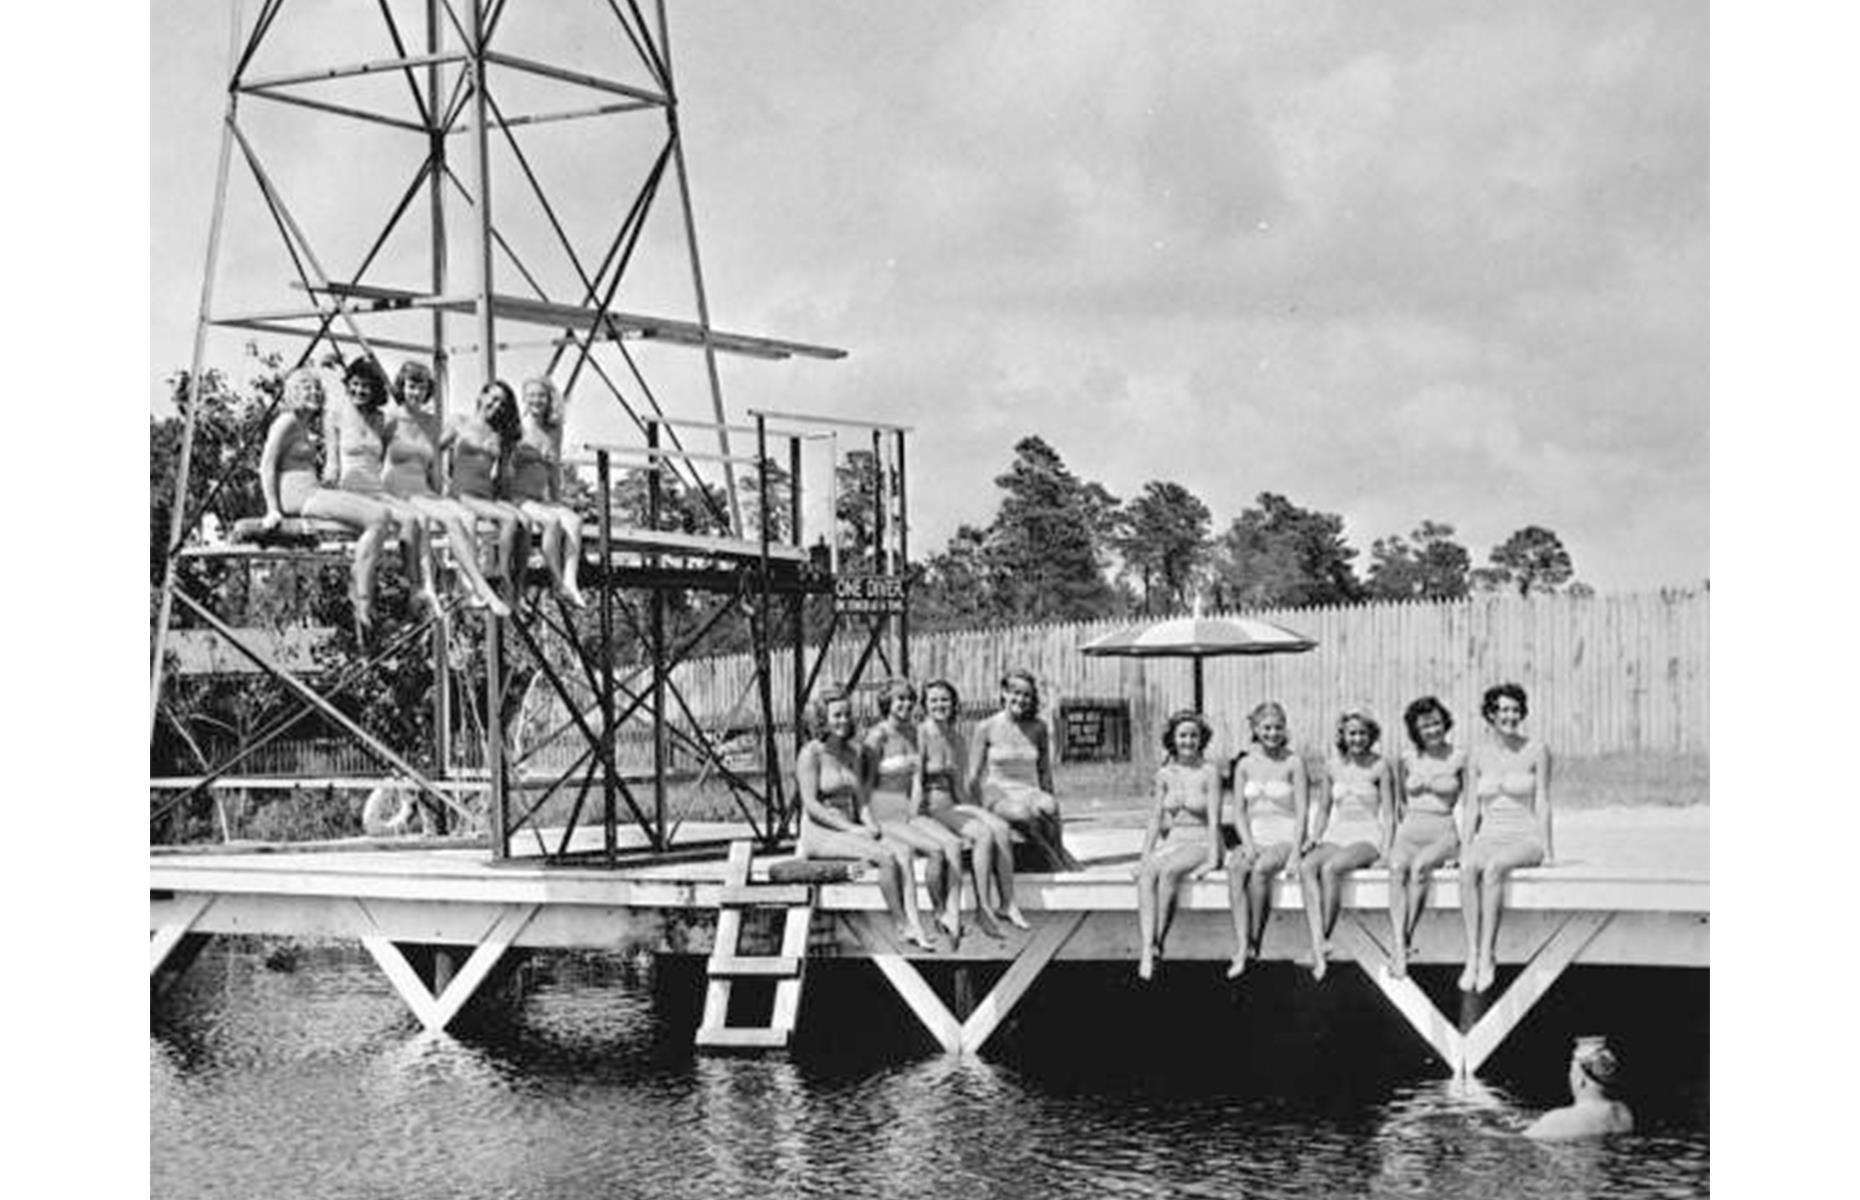 <p>Weeki Wachee is one of the deepest natural springs in the US, but the attraction has become well-known for its popular mermaid shows which have taken place since the 1940s. These involve real-life “mermaids” swimming up to 16 feet (5m) below the surface to perform impressive synchronized dances. Pictured here in 1949 are some mermaids cooling off at the dock between shows. Today, the site has grown to include a water park, riverboat rides and casual restaurants.</p>